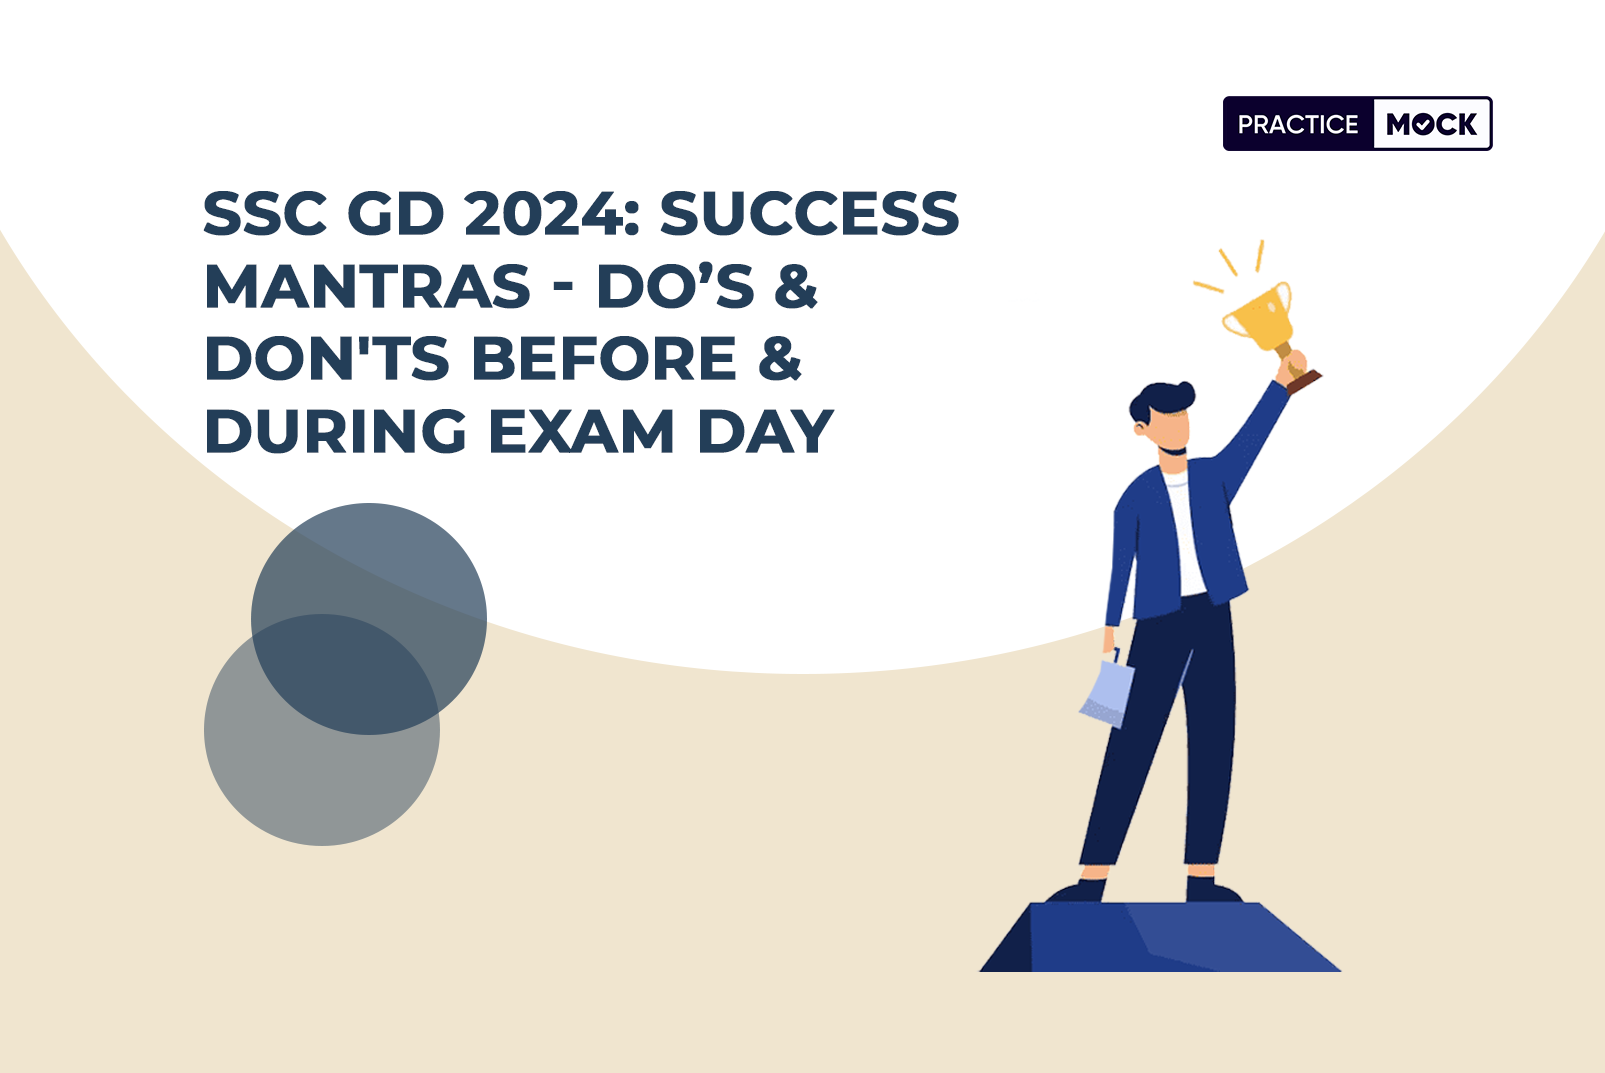 SSC GD 2024: Success Mantras - Do’s & Don'ts Before & During Exam Day